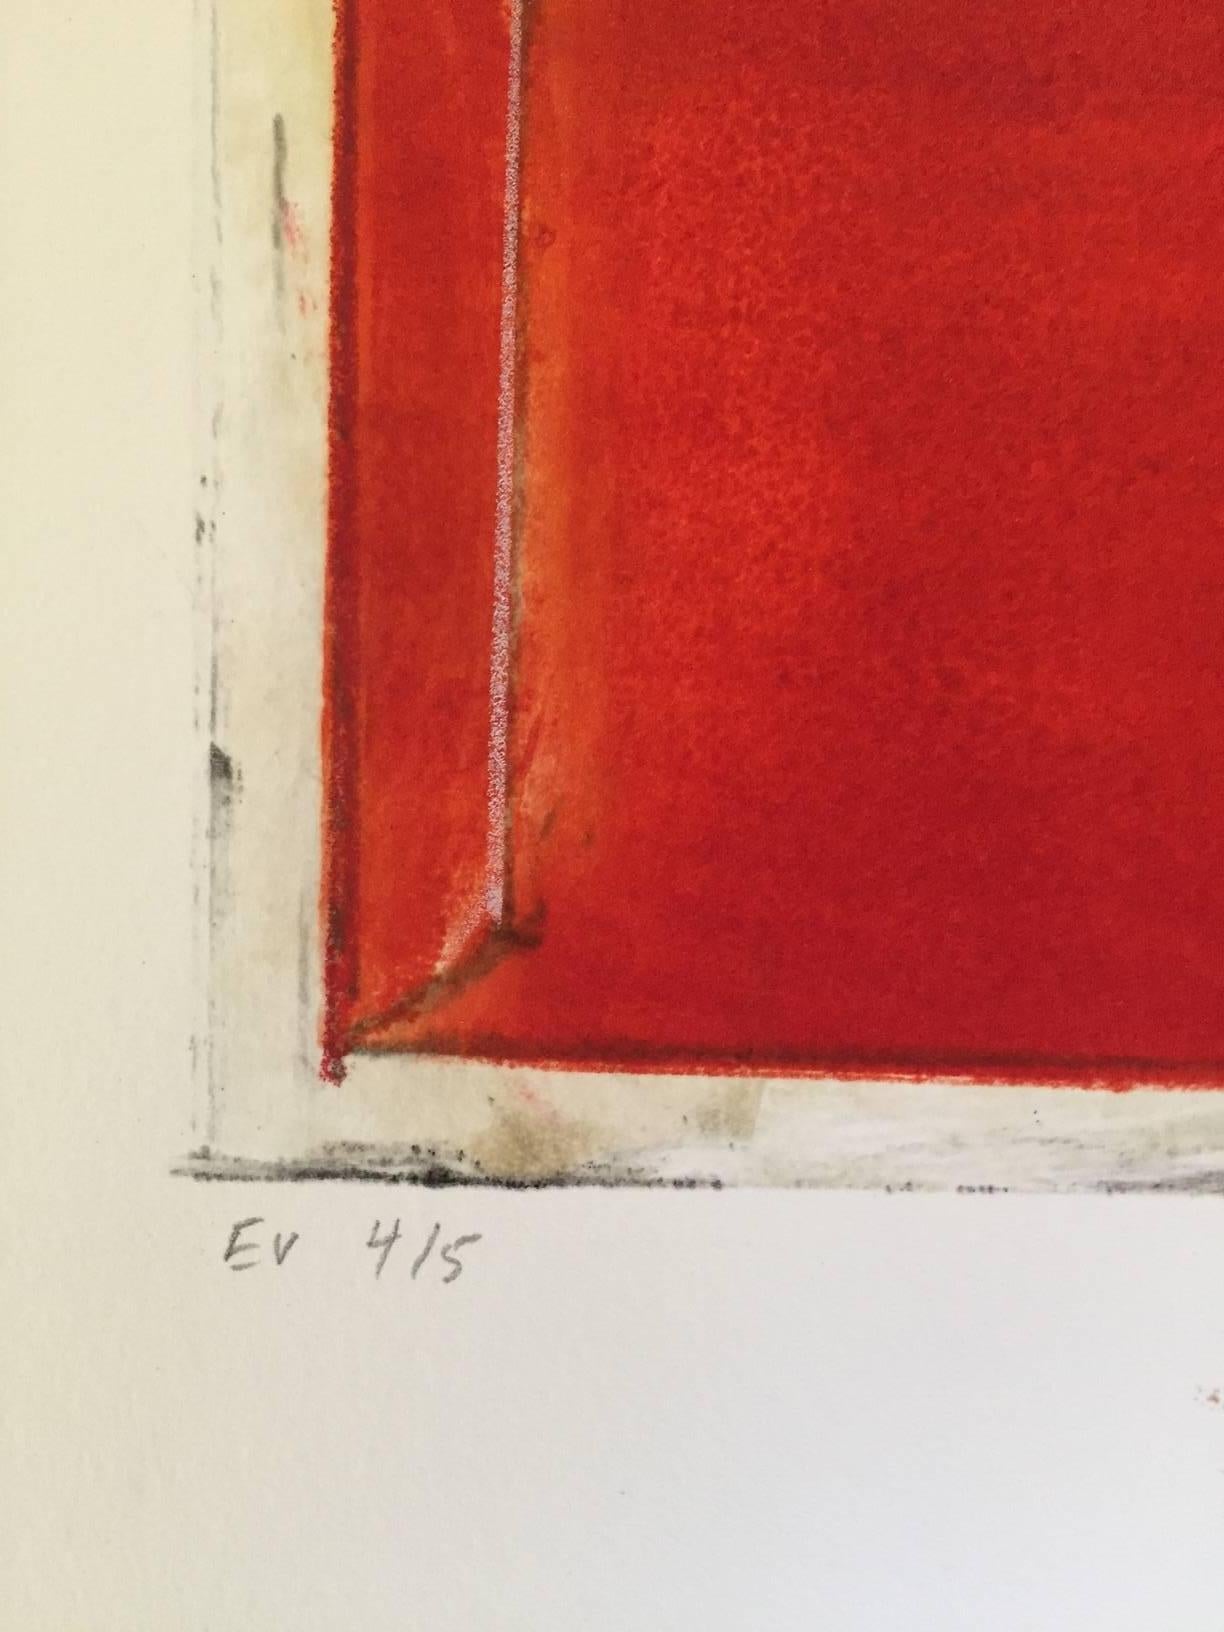 Red envelopes monotype EV —edition variée. ed 4/5. The plate is 17 x 11 inches and the overall paper dimension is 27 x 18 inches, featuring a composition of nine red envelopes. Matting or framing is available for an additional charge.  Frohsin